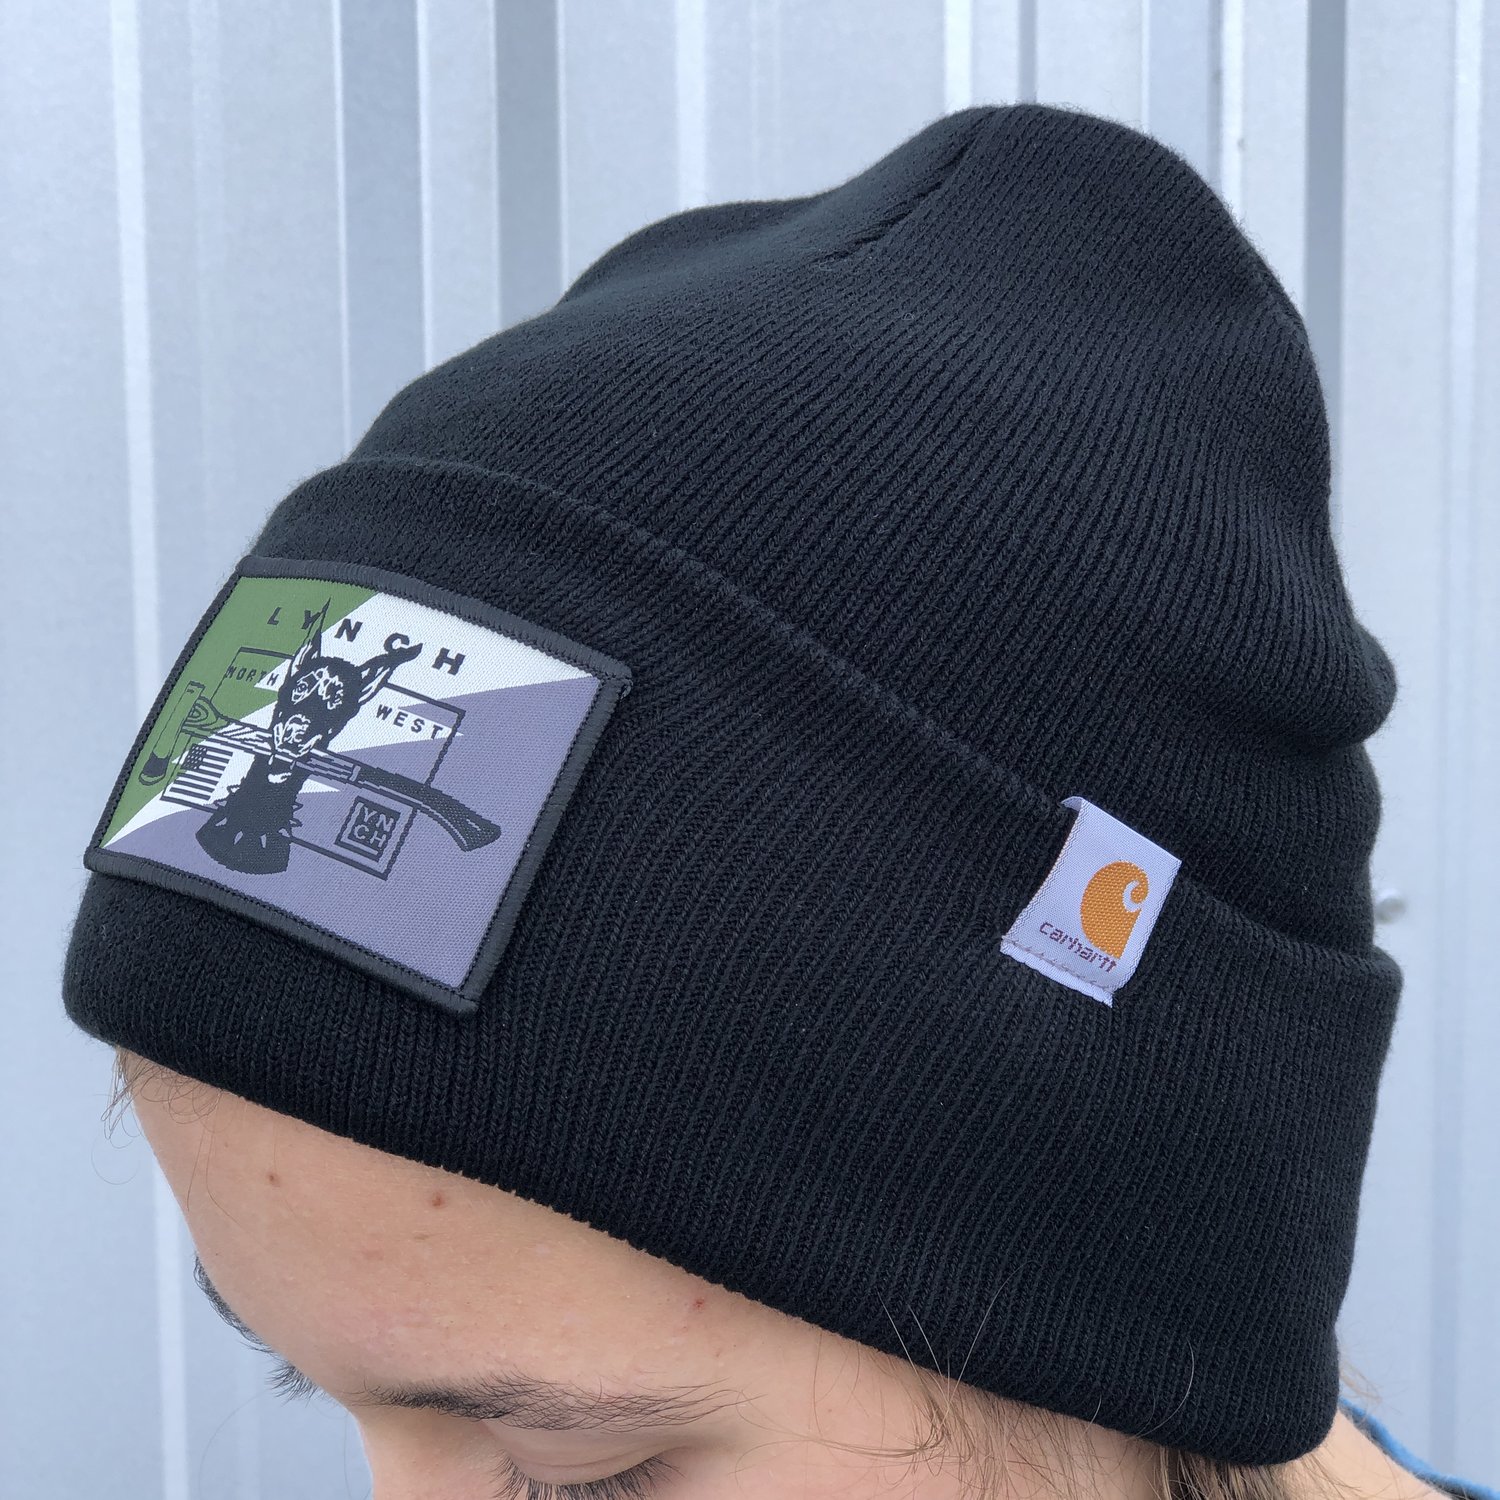 North Face Mountain Black Beanie - Leather Dog Patch